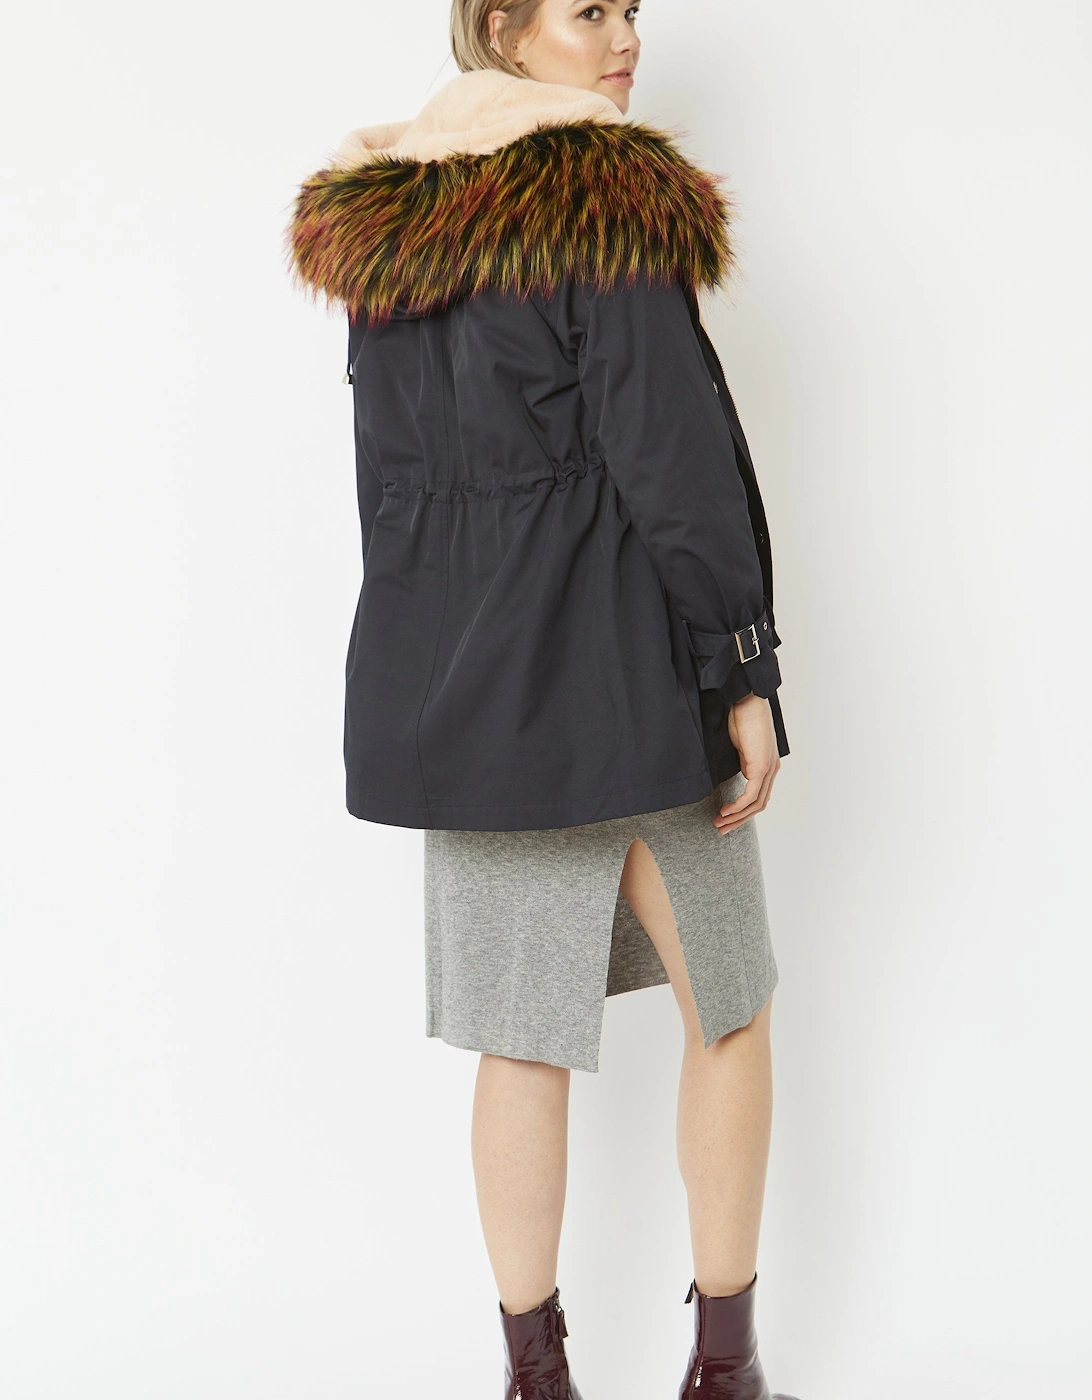 Three in One Parka Coat with Faux Fur Trim